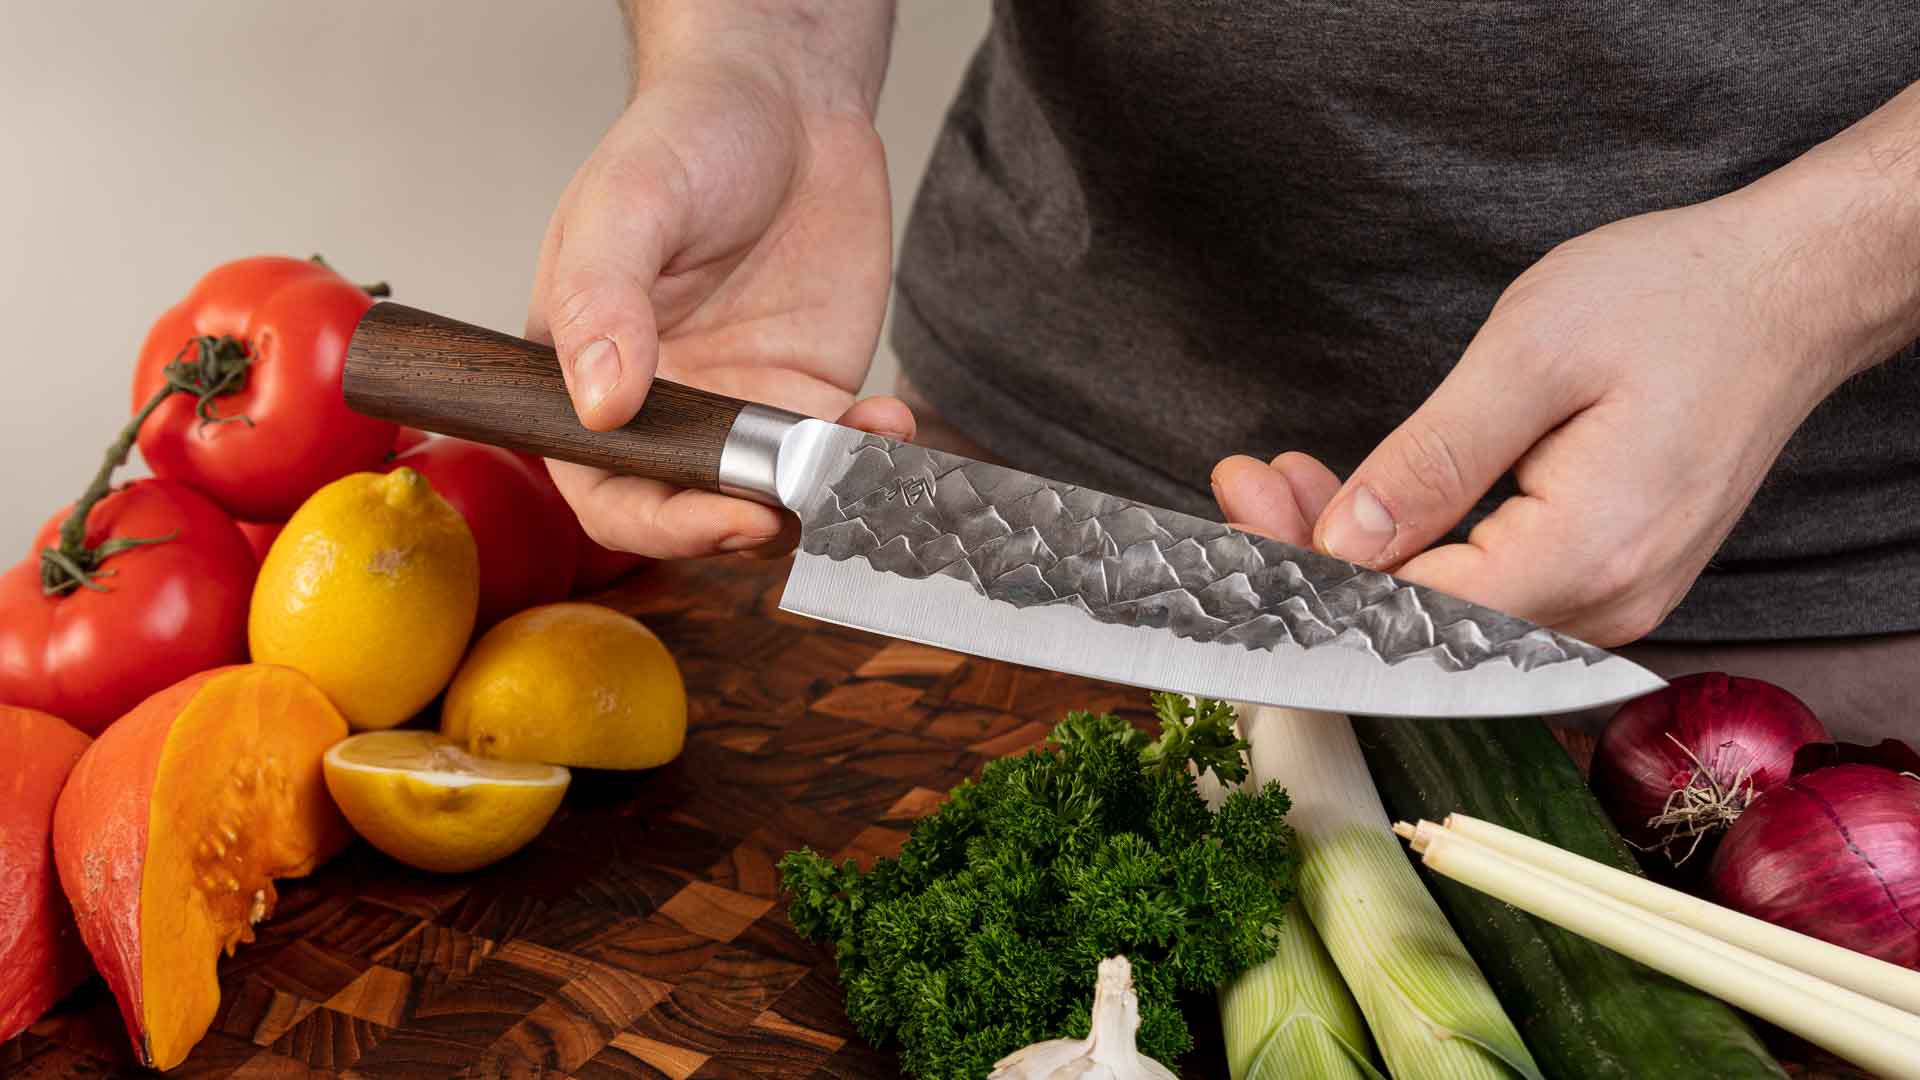 How to use a chef's knife